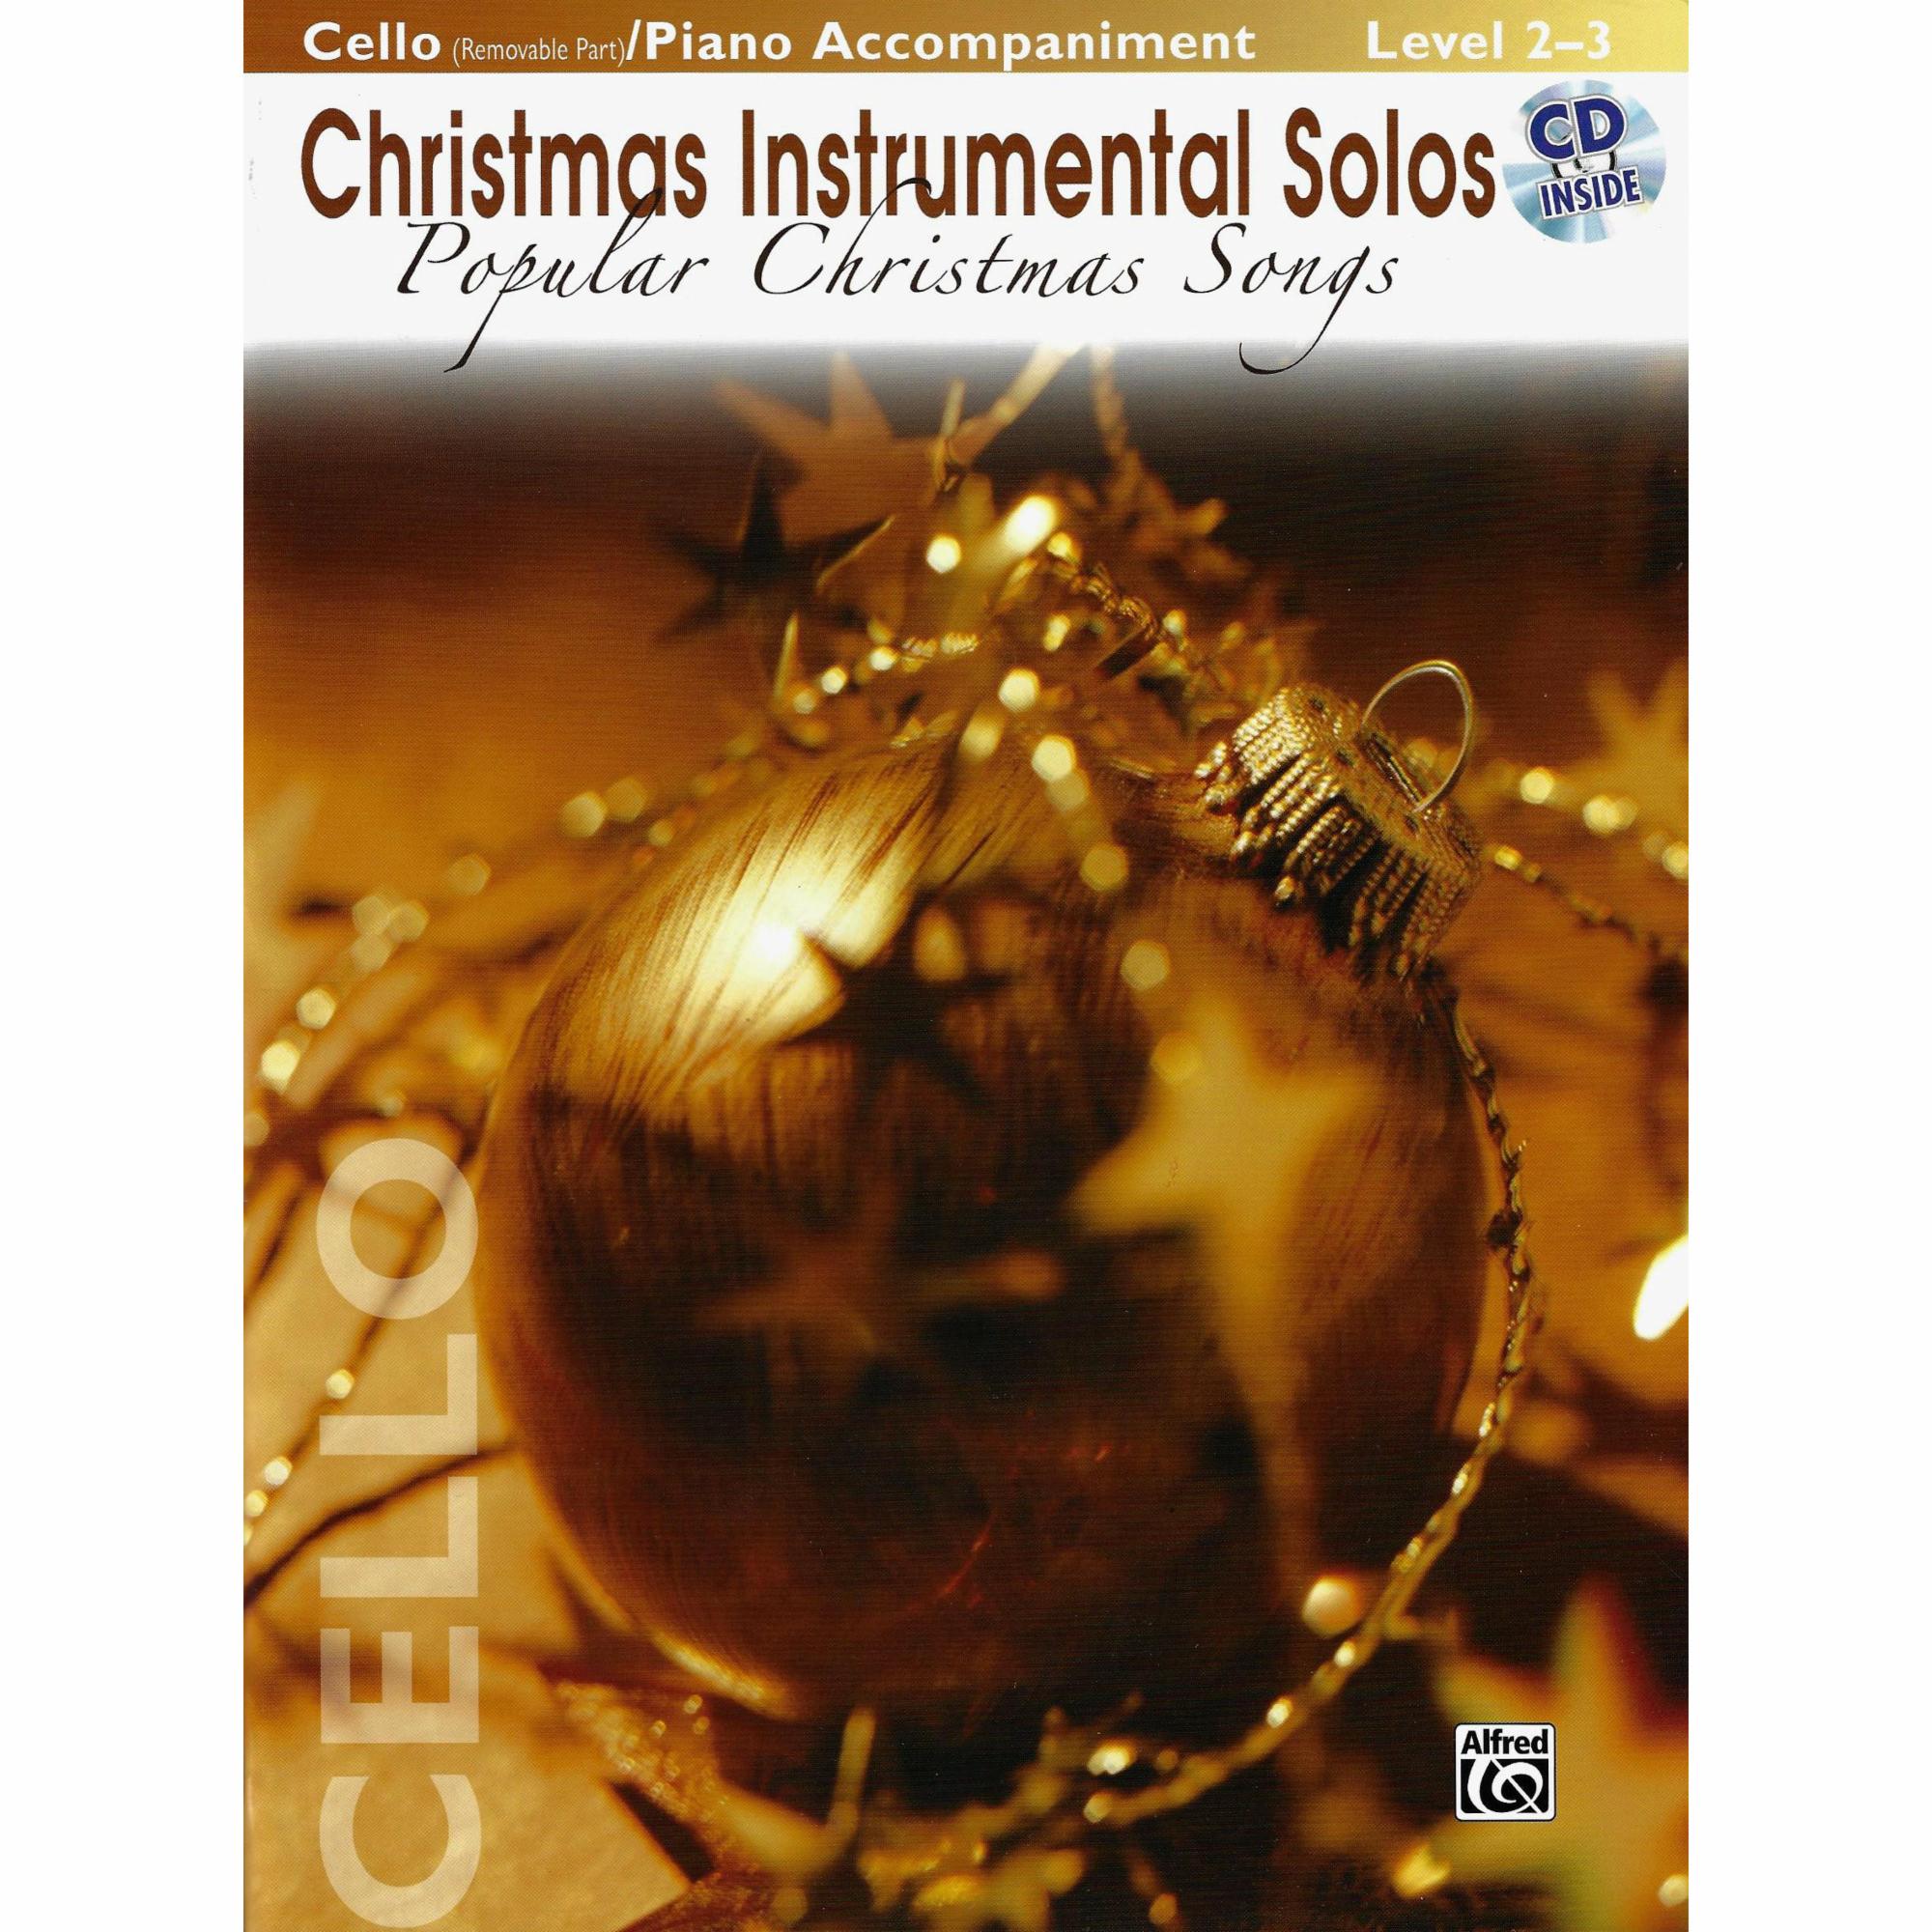 Popular Christmas Songs for Cello and Piano